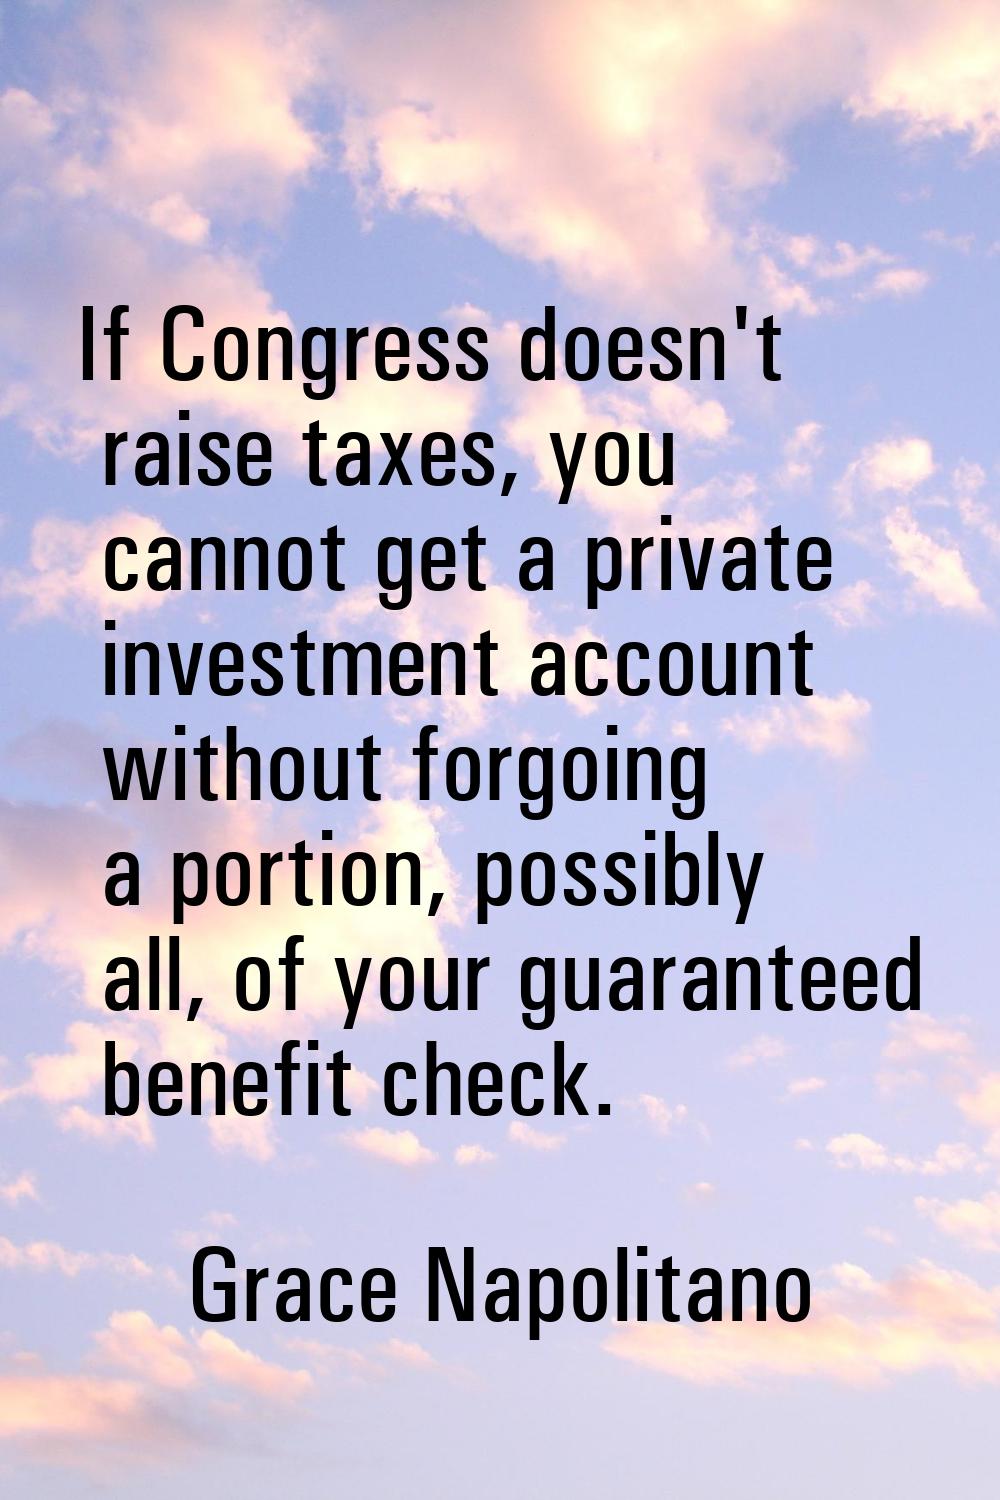 If Congress doesn't raise taxes, you cannot get a private investment account without forgoing a por